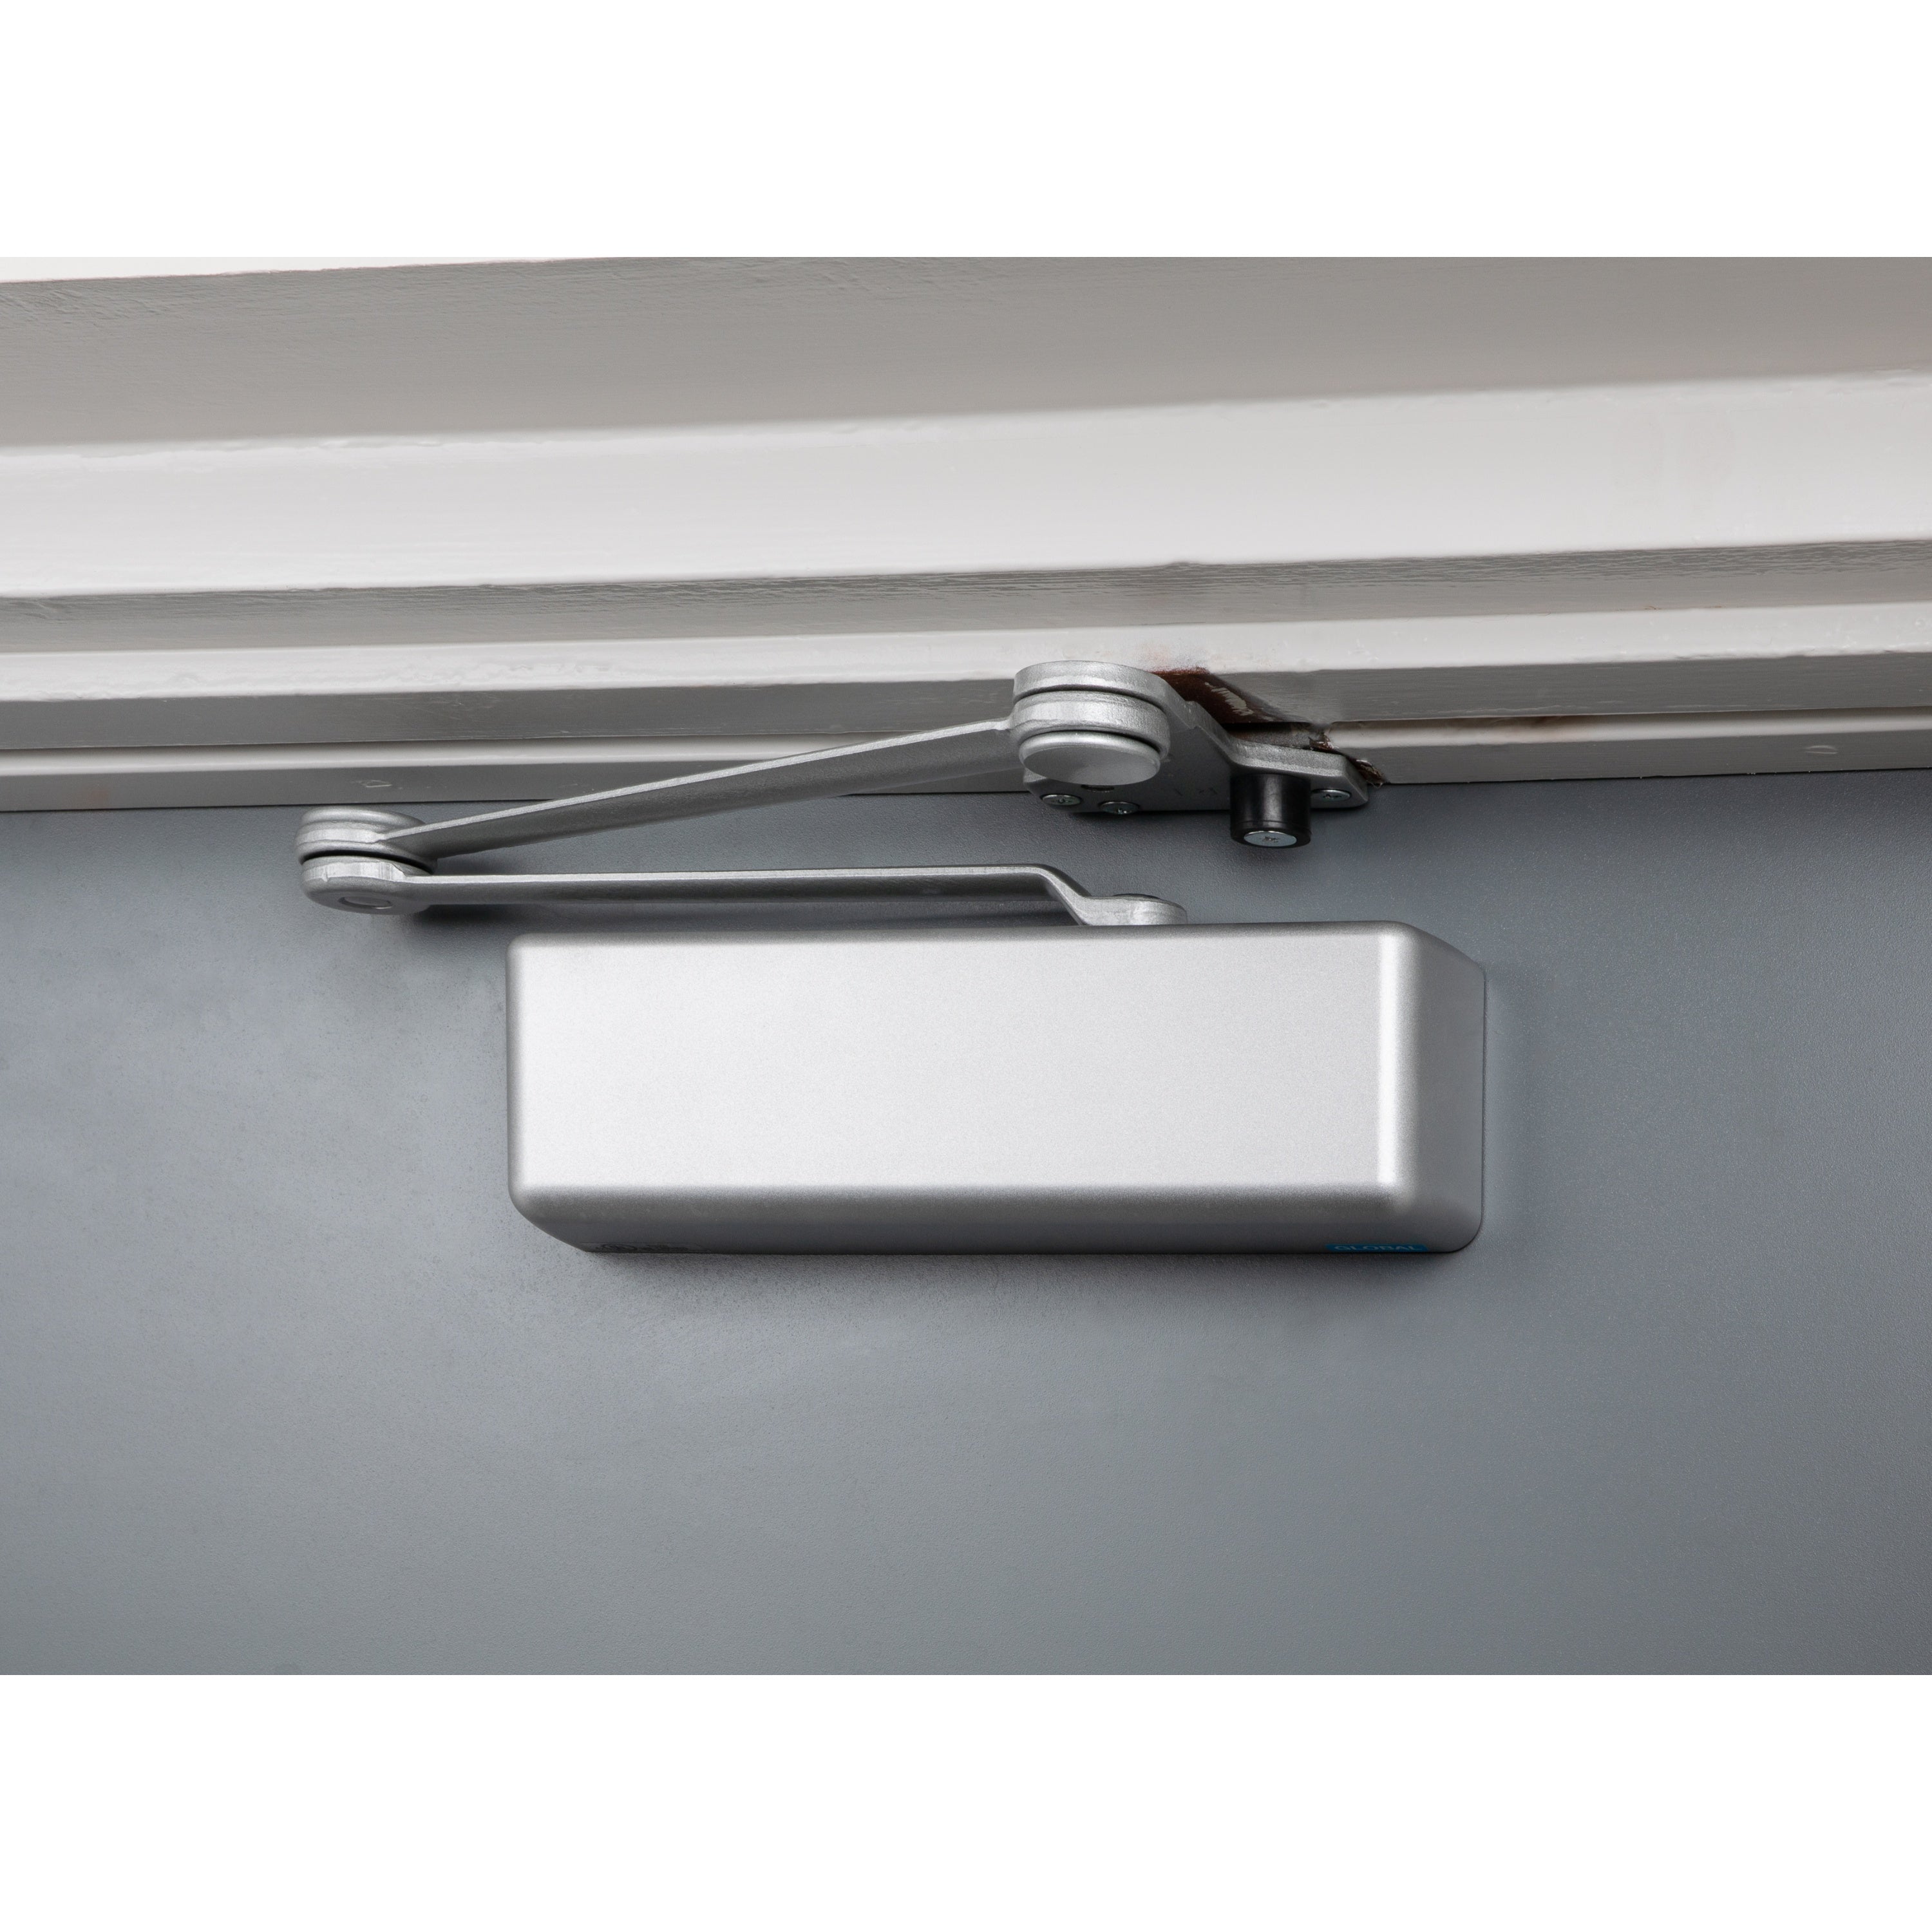 Heavy Duty ADA Commercial Grade 1 Door Closer with Hold Open Cush-N-Stop Arm - Sizes 1-6